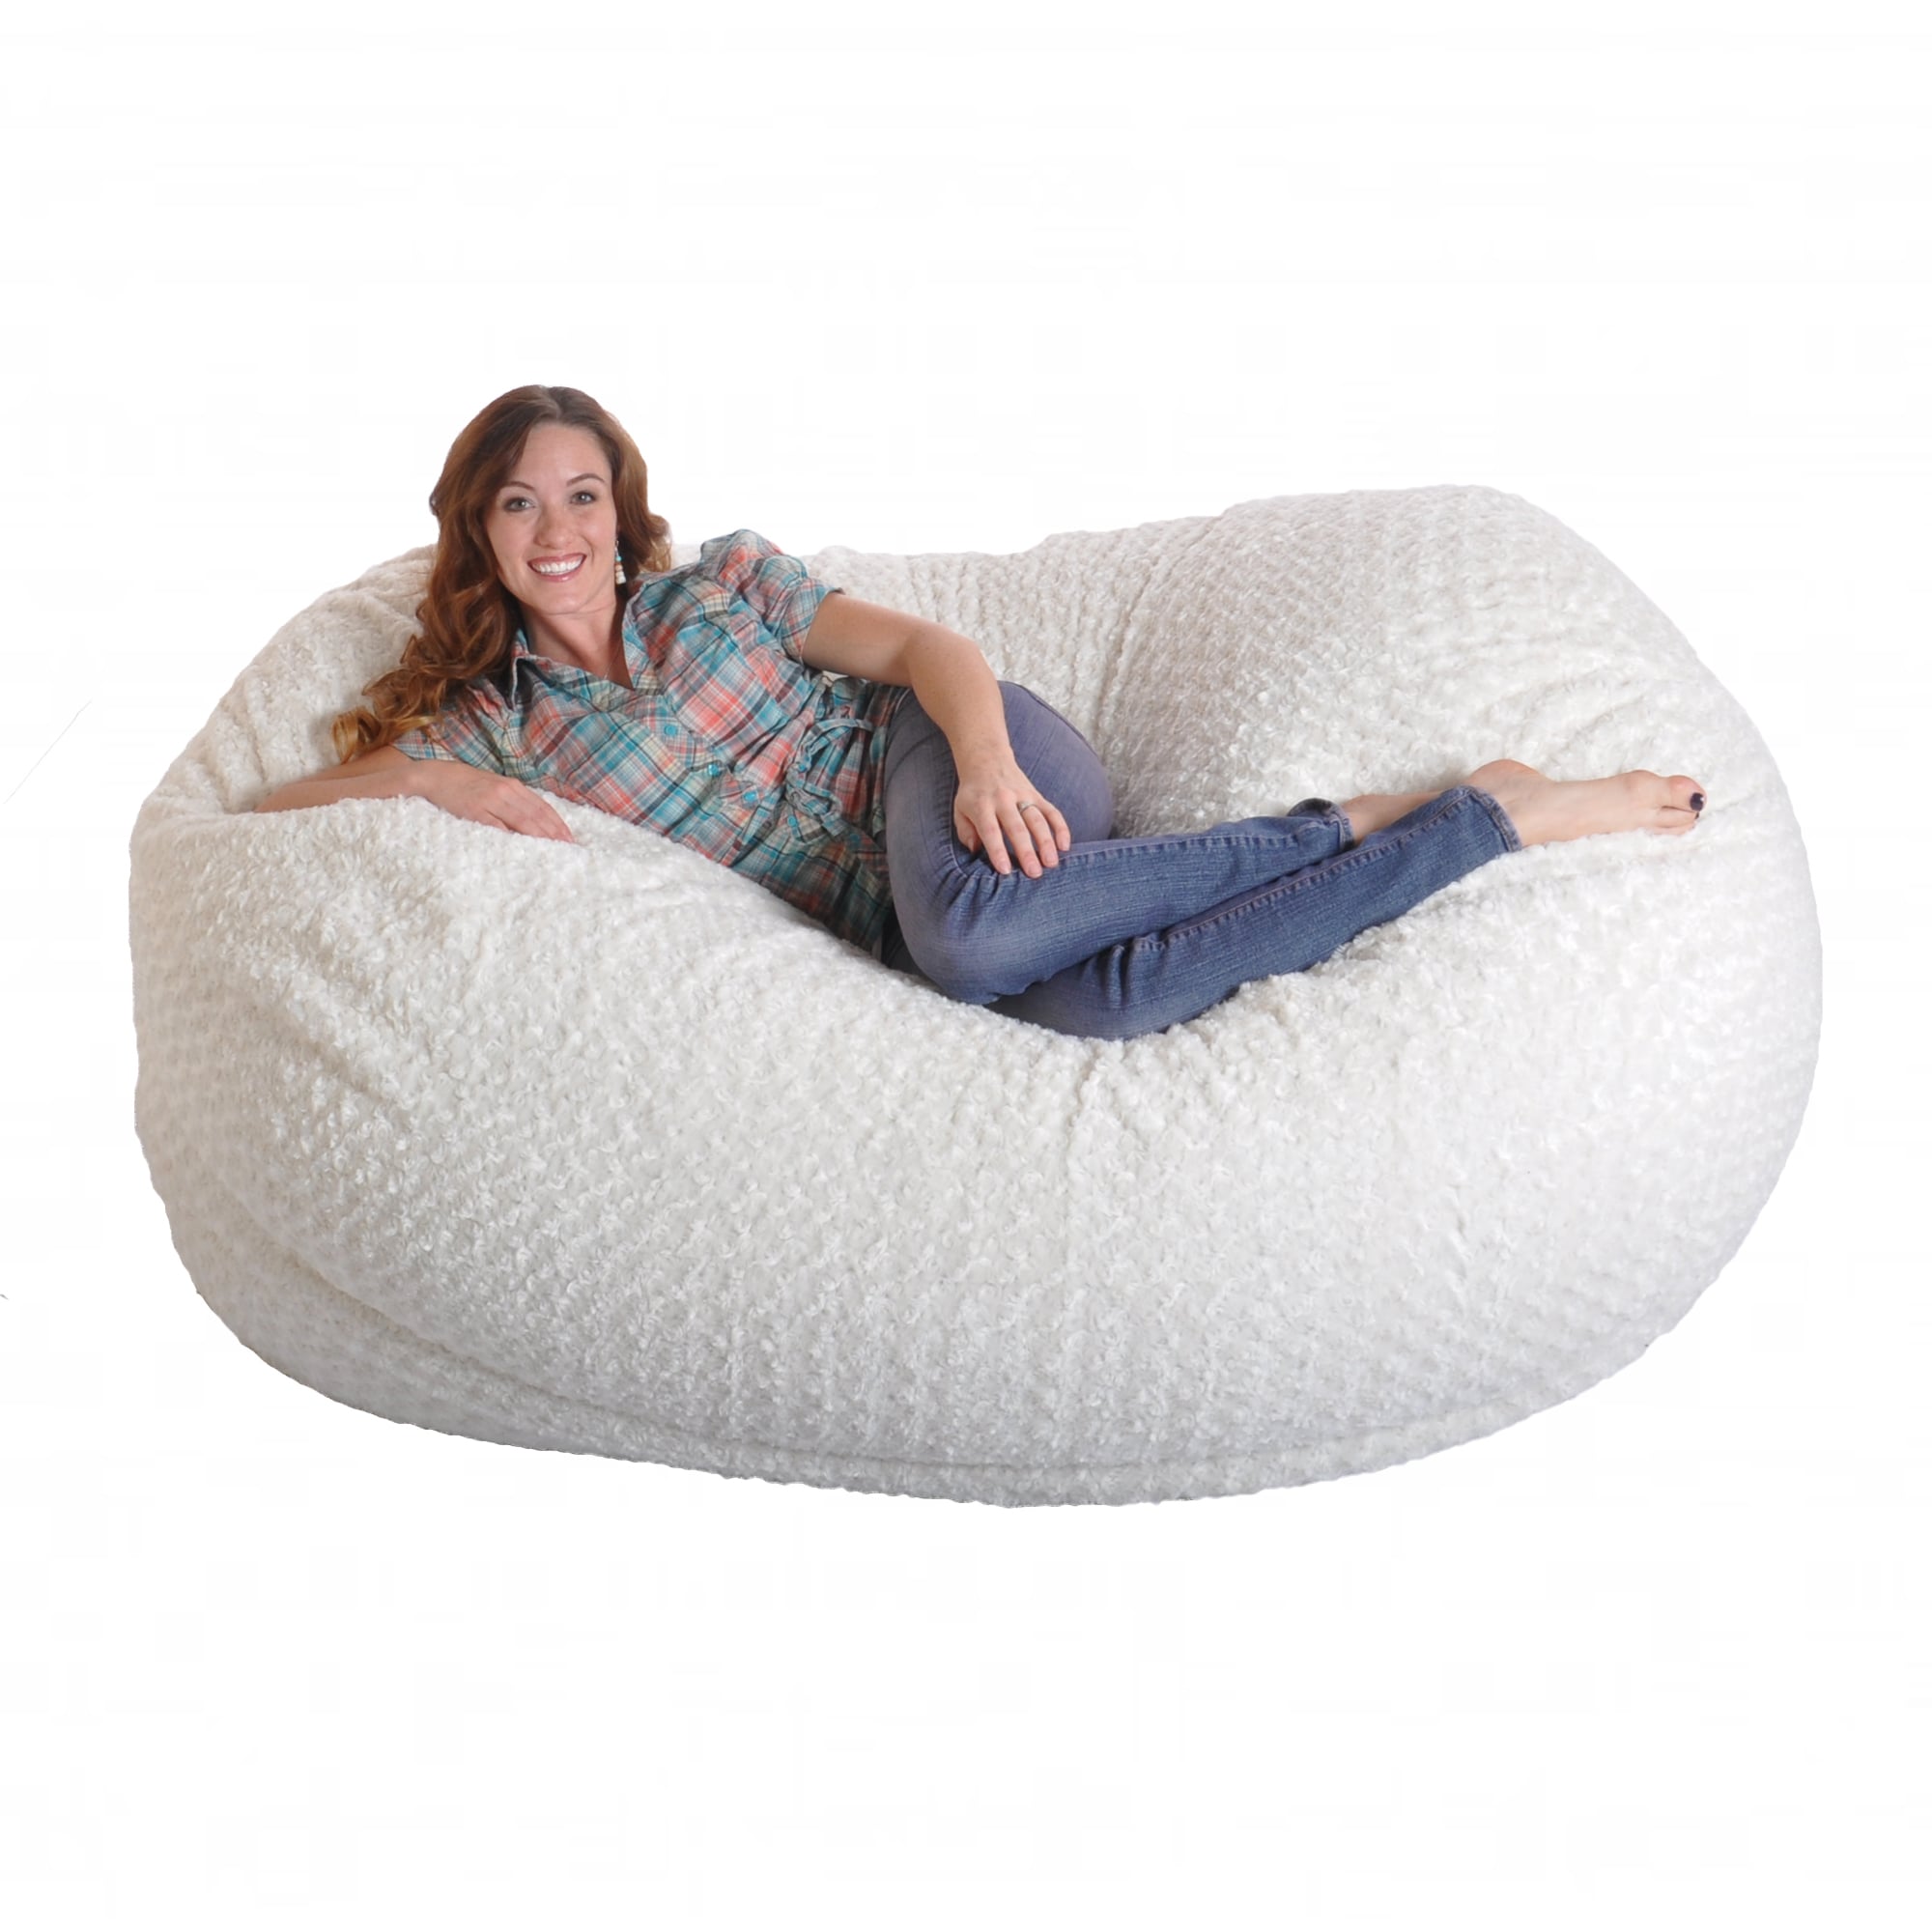 6 Foot Soft White Fur Large Oval Microfiber Memory Foam Bean Bag Chair On Sale Overstock 8502975